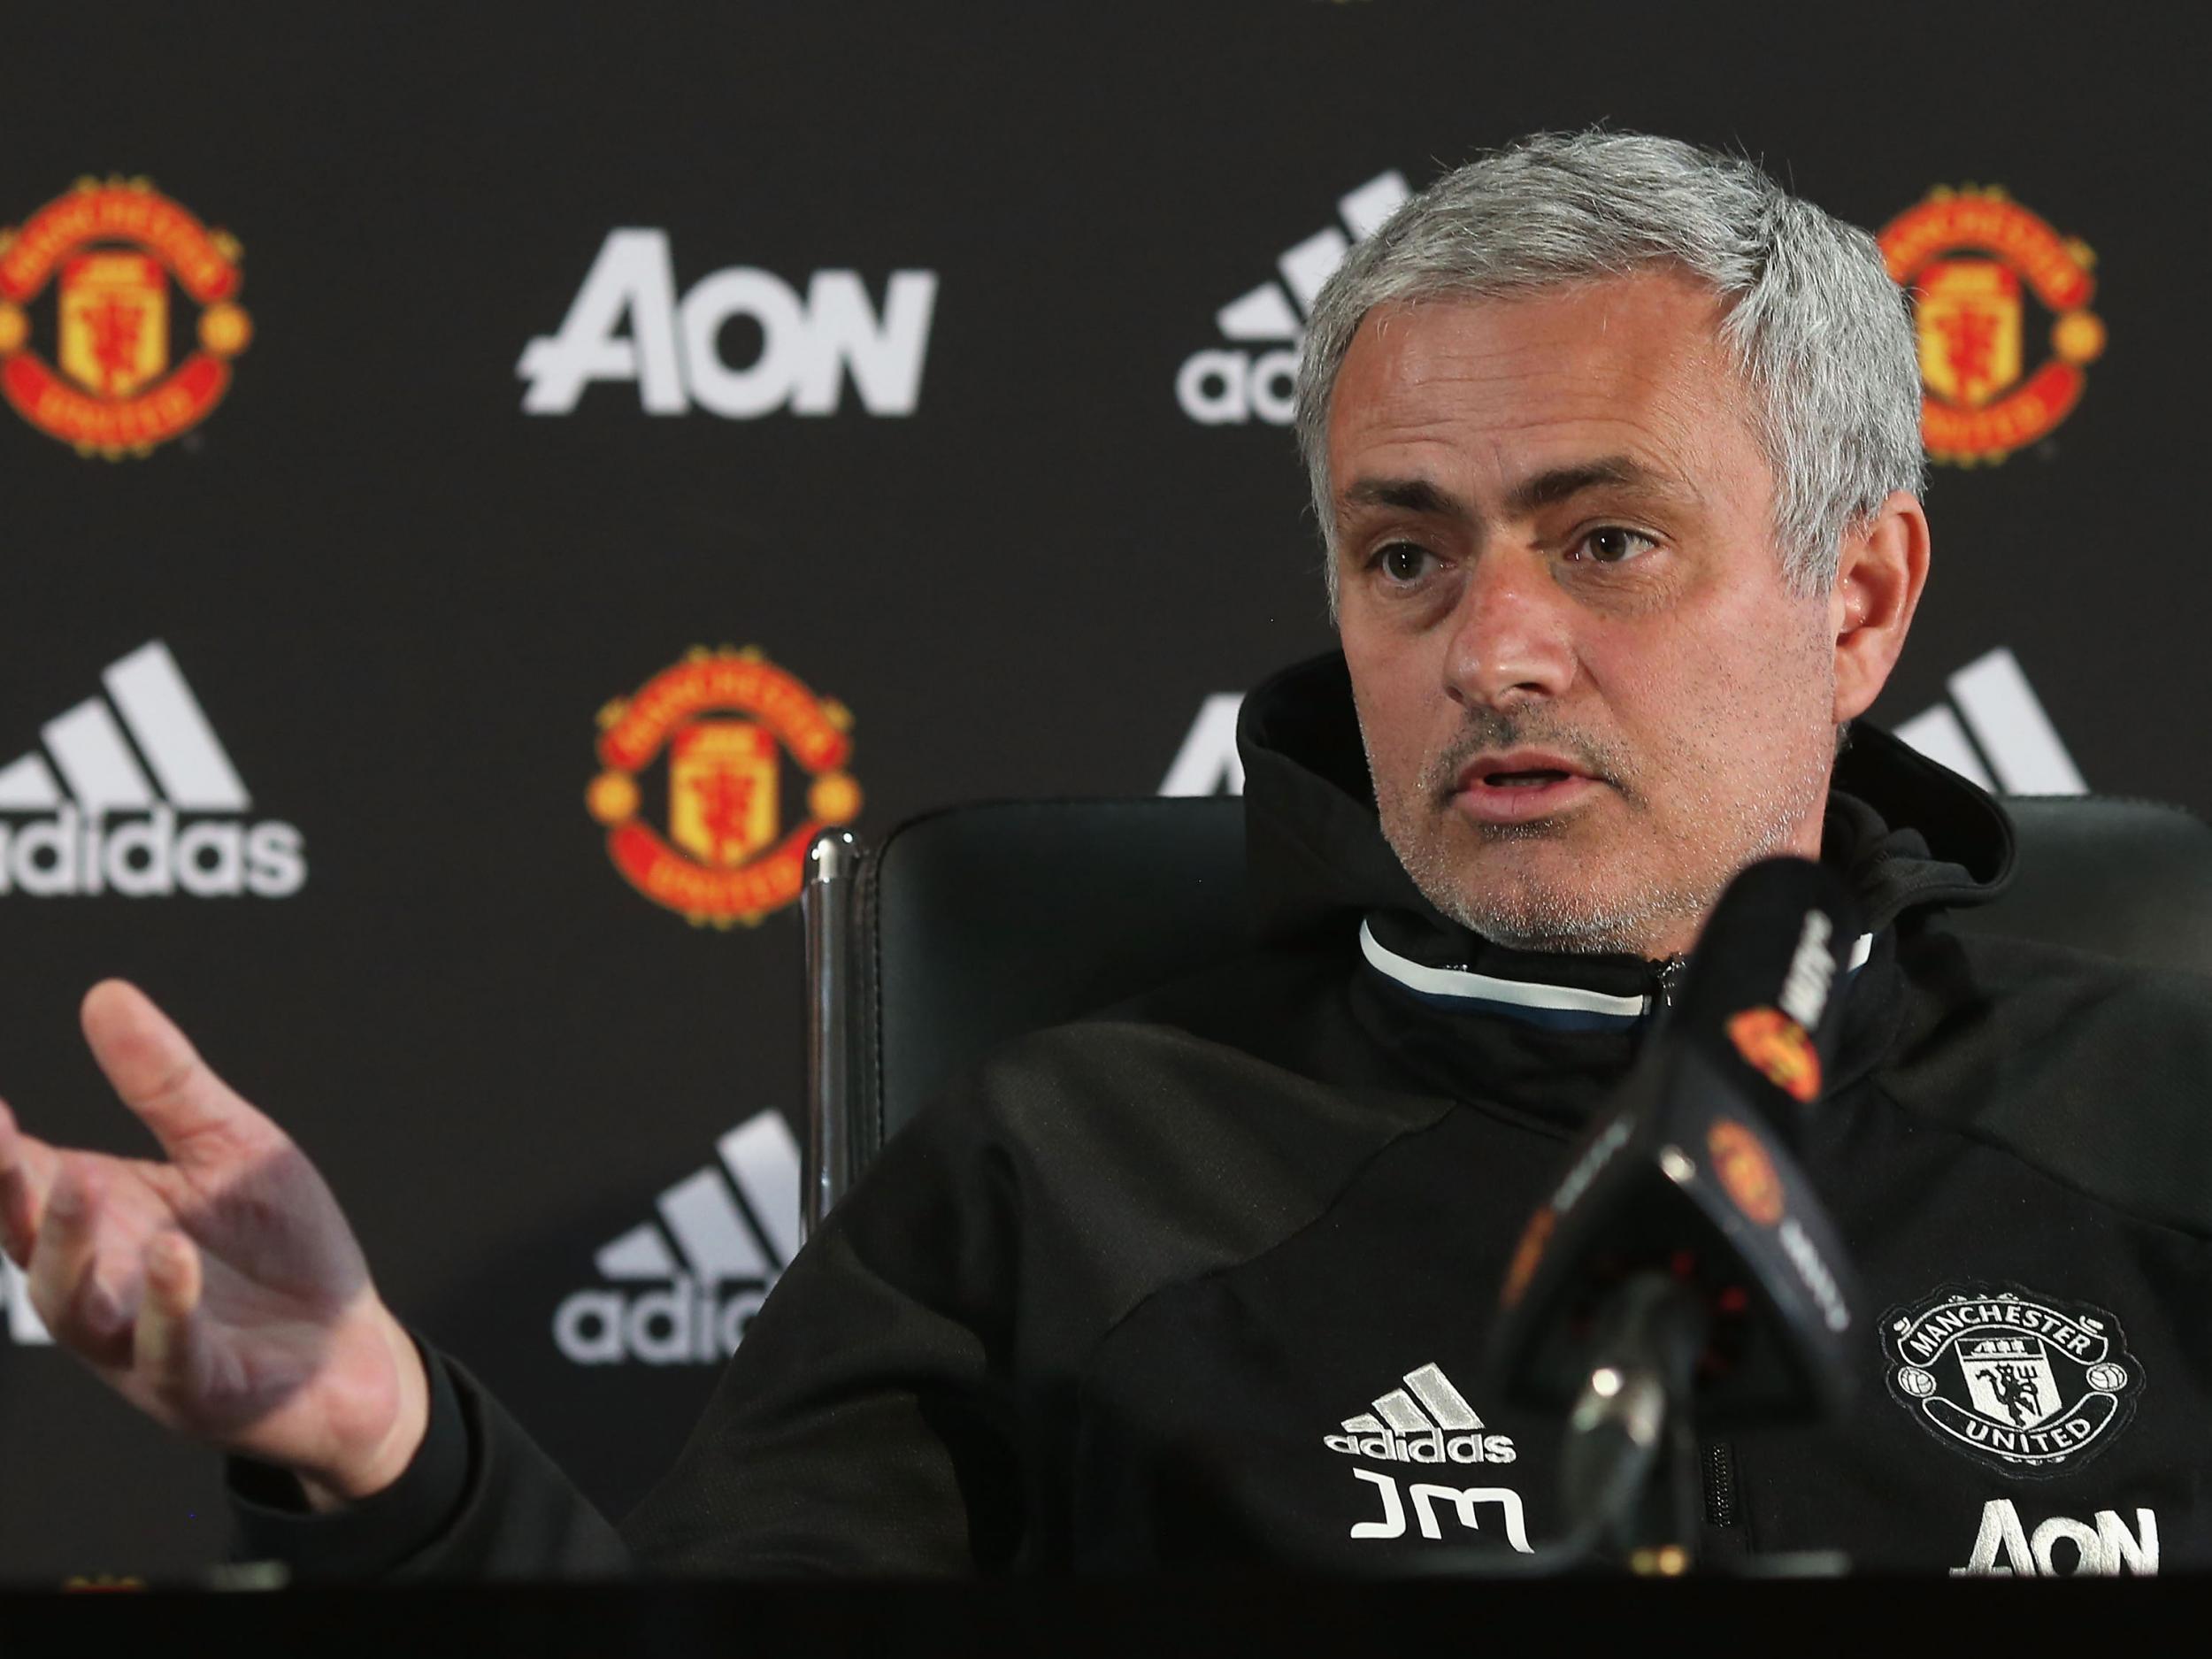 Mourinho is however confident his side's home form will improve